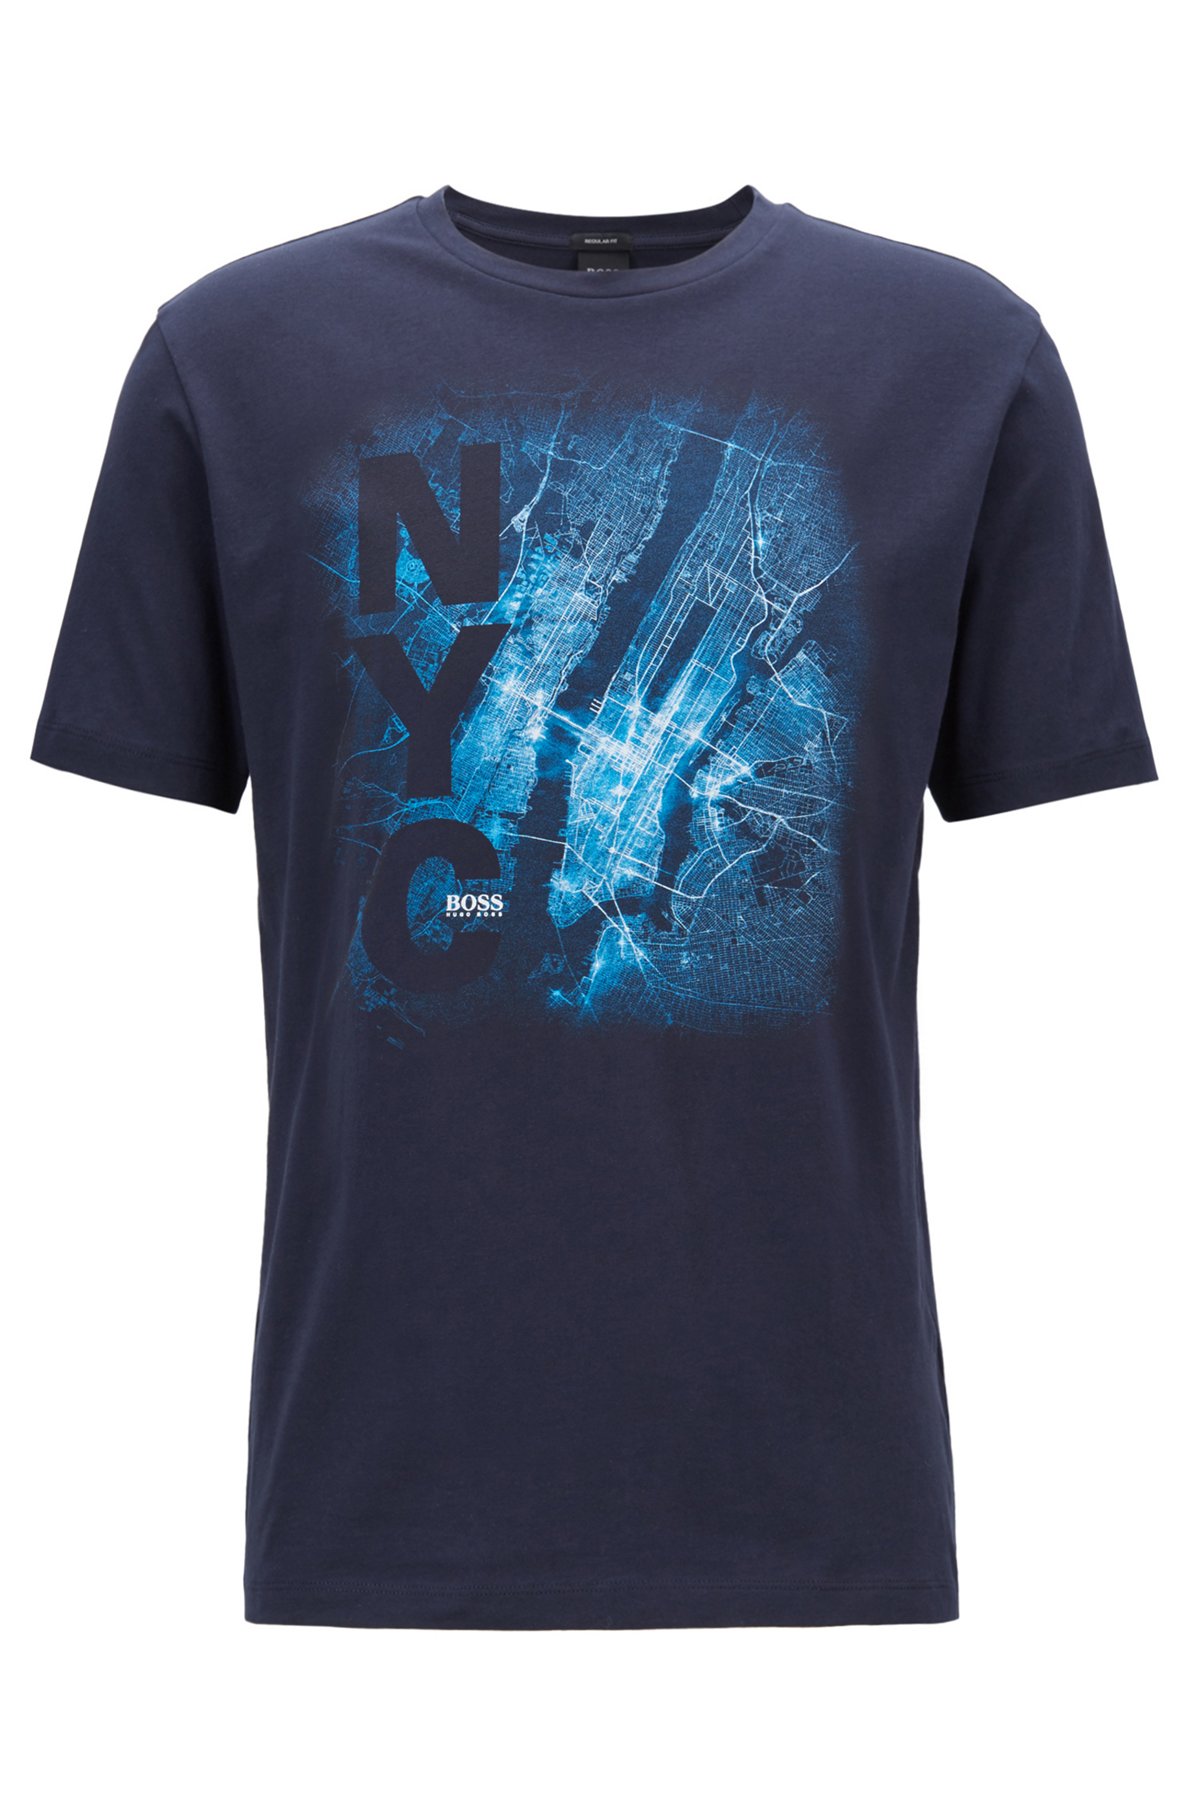 BOSS - Limited edition Formula E T-shirt with New York City print